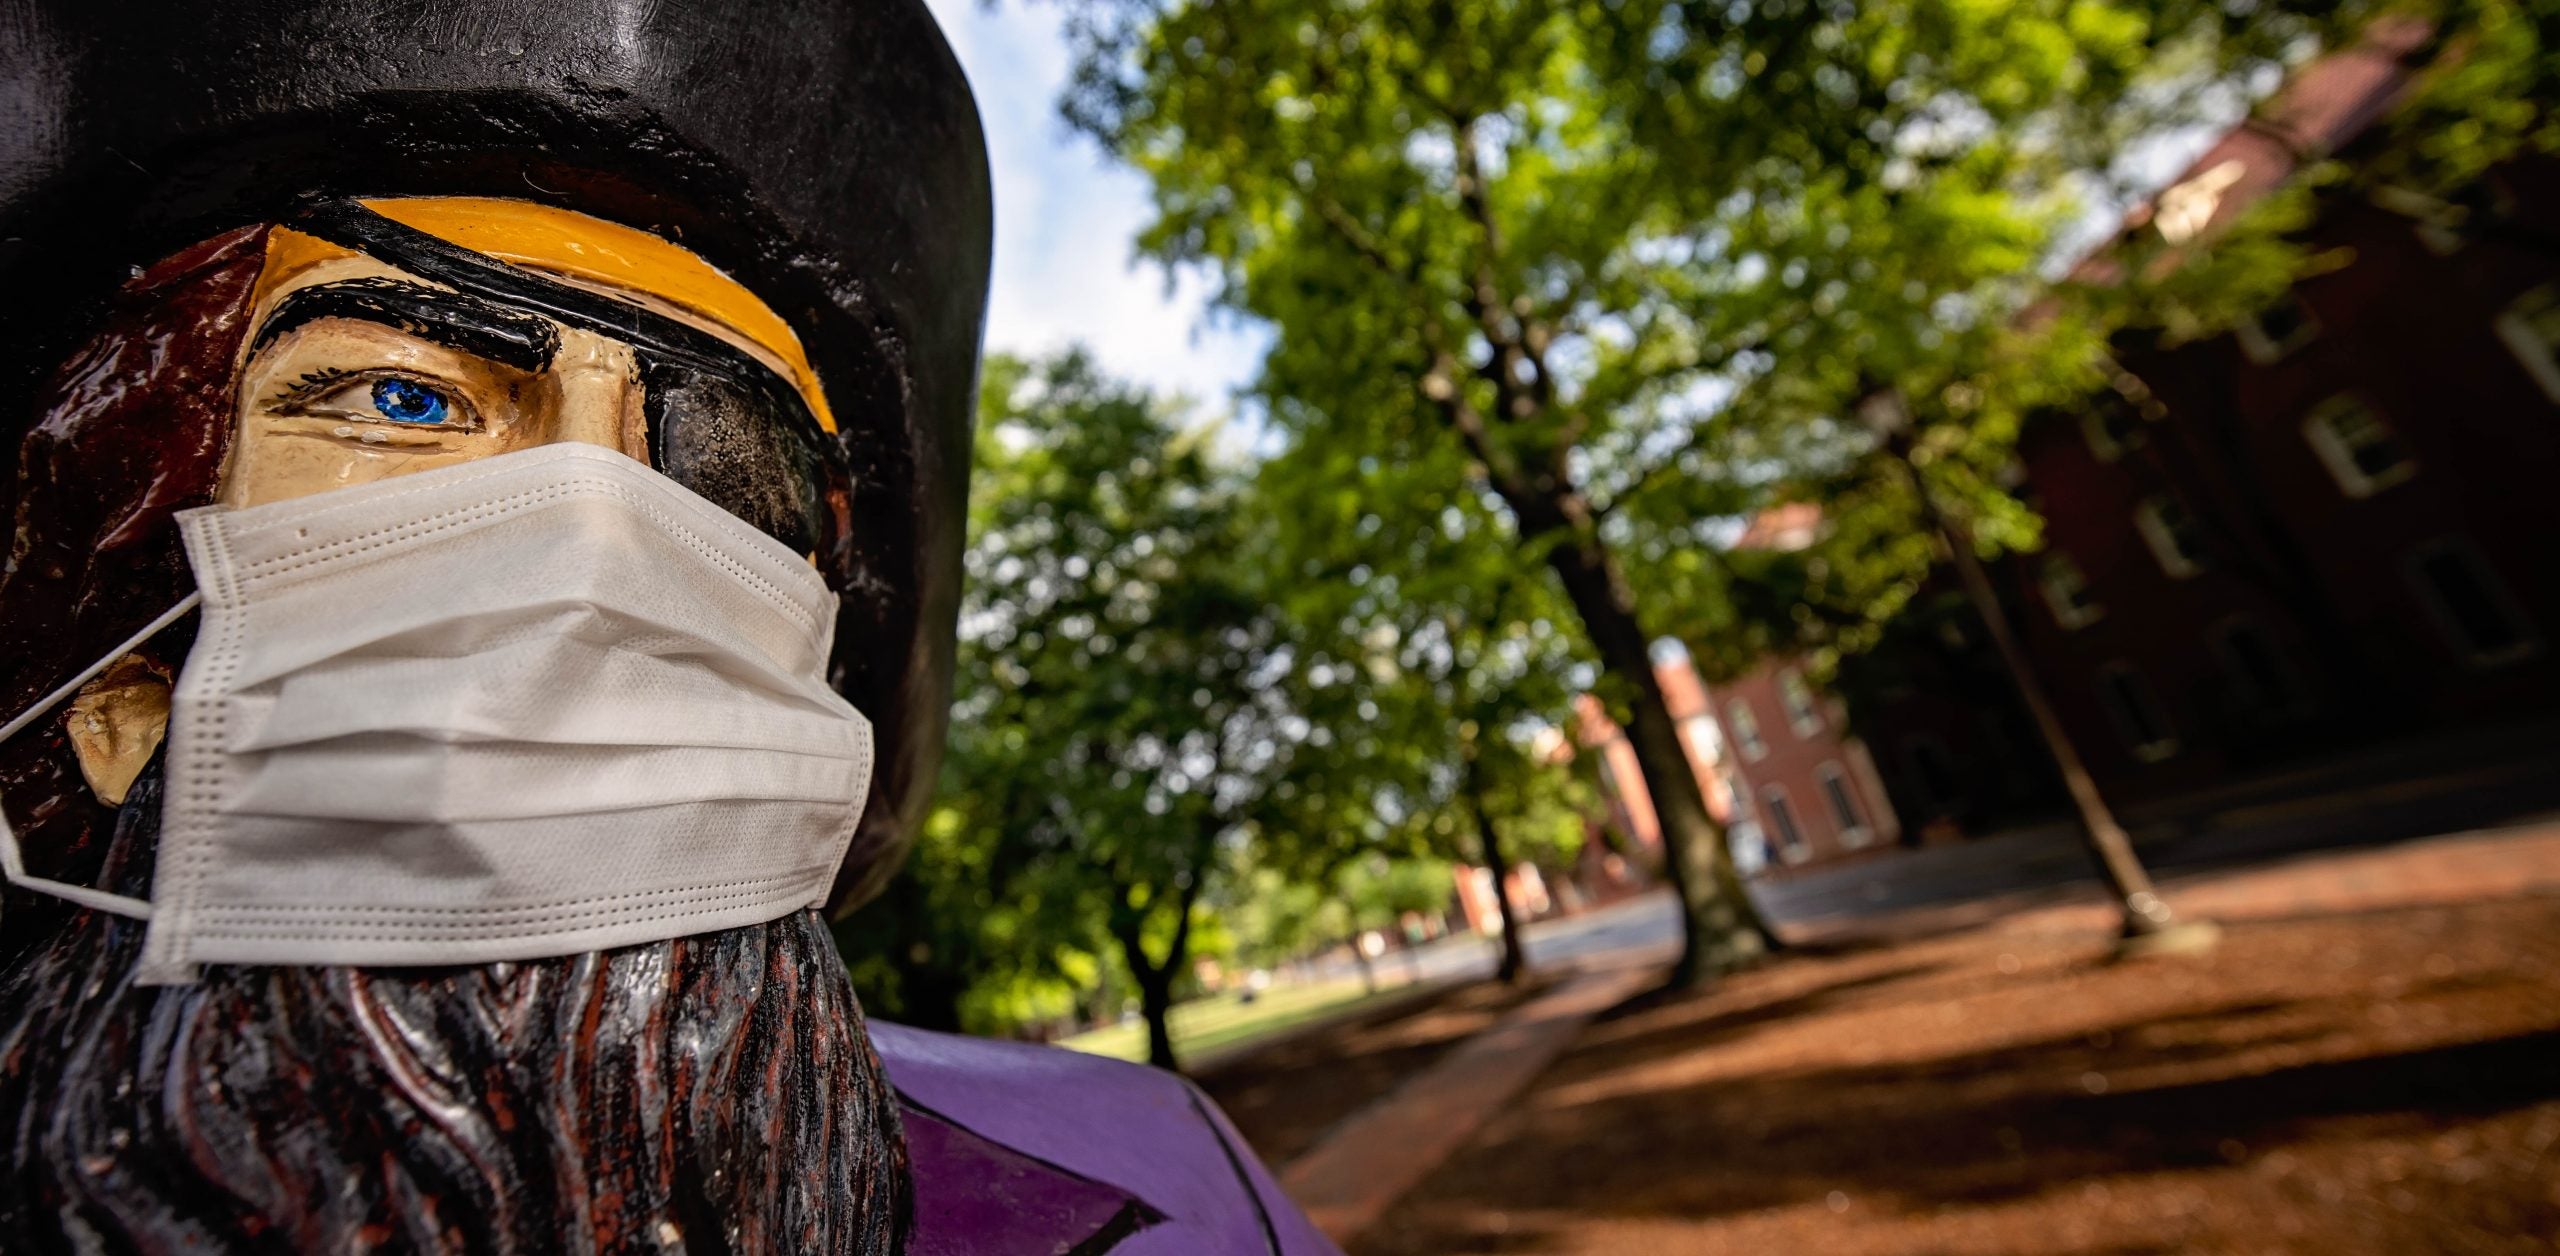 The Pirate on campus with a mask. (ECU Photo by Cliff Hollis)